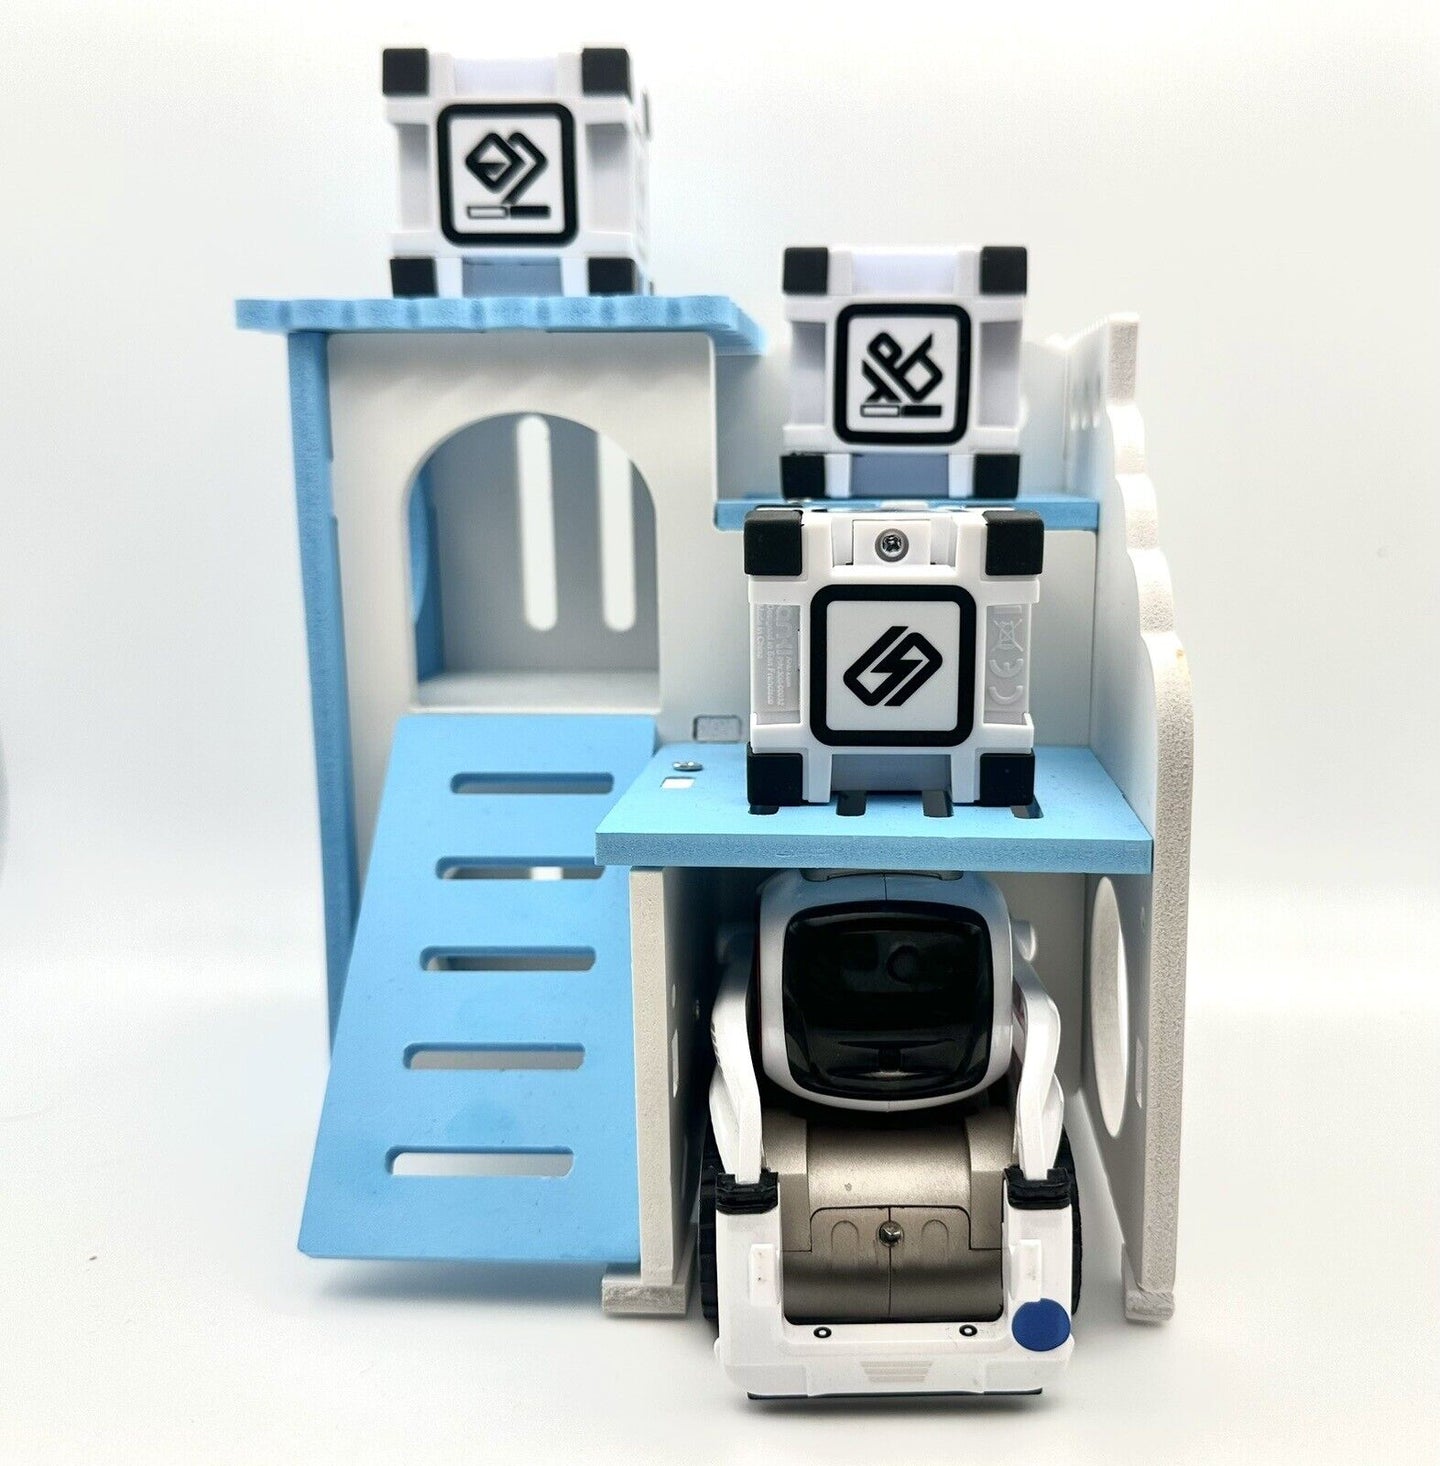 Toy House For Anki Cozmo House [Robot Not Included] - Chys Thijarah